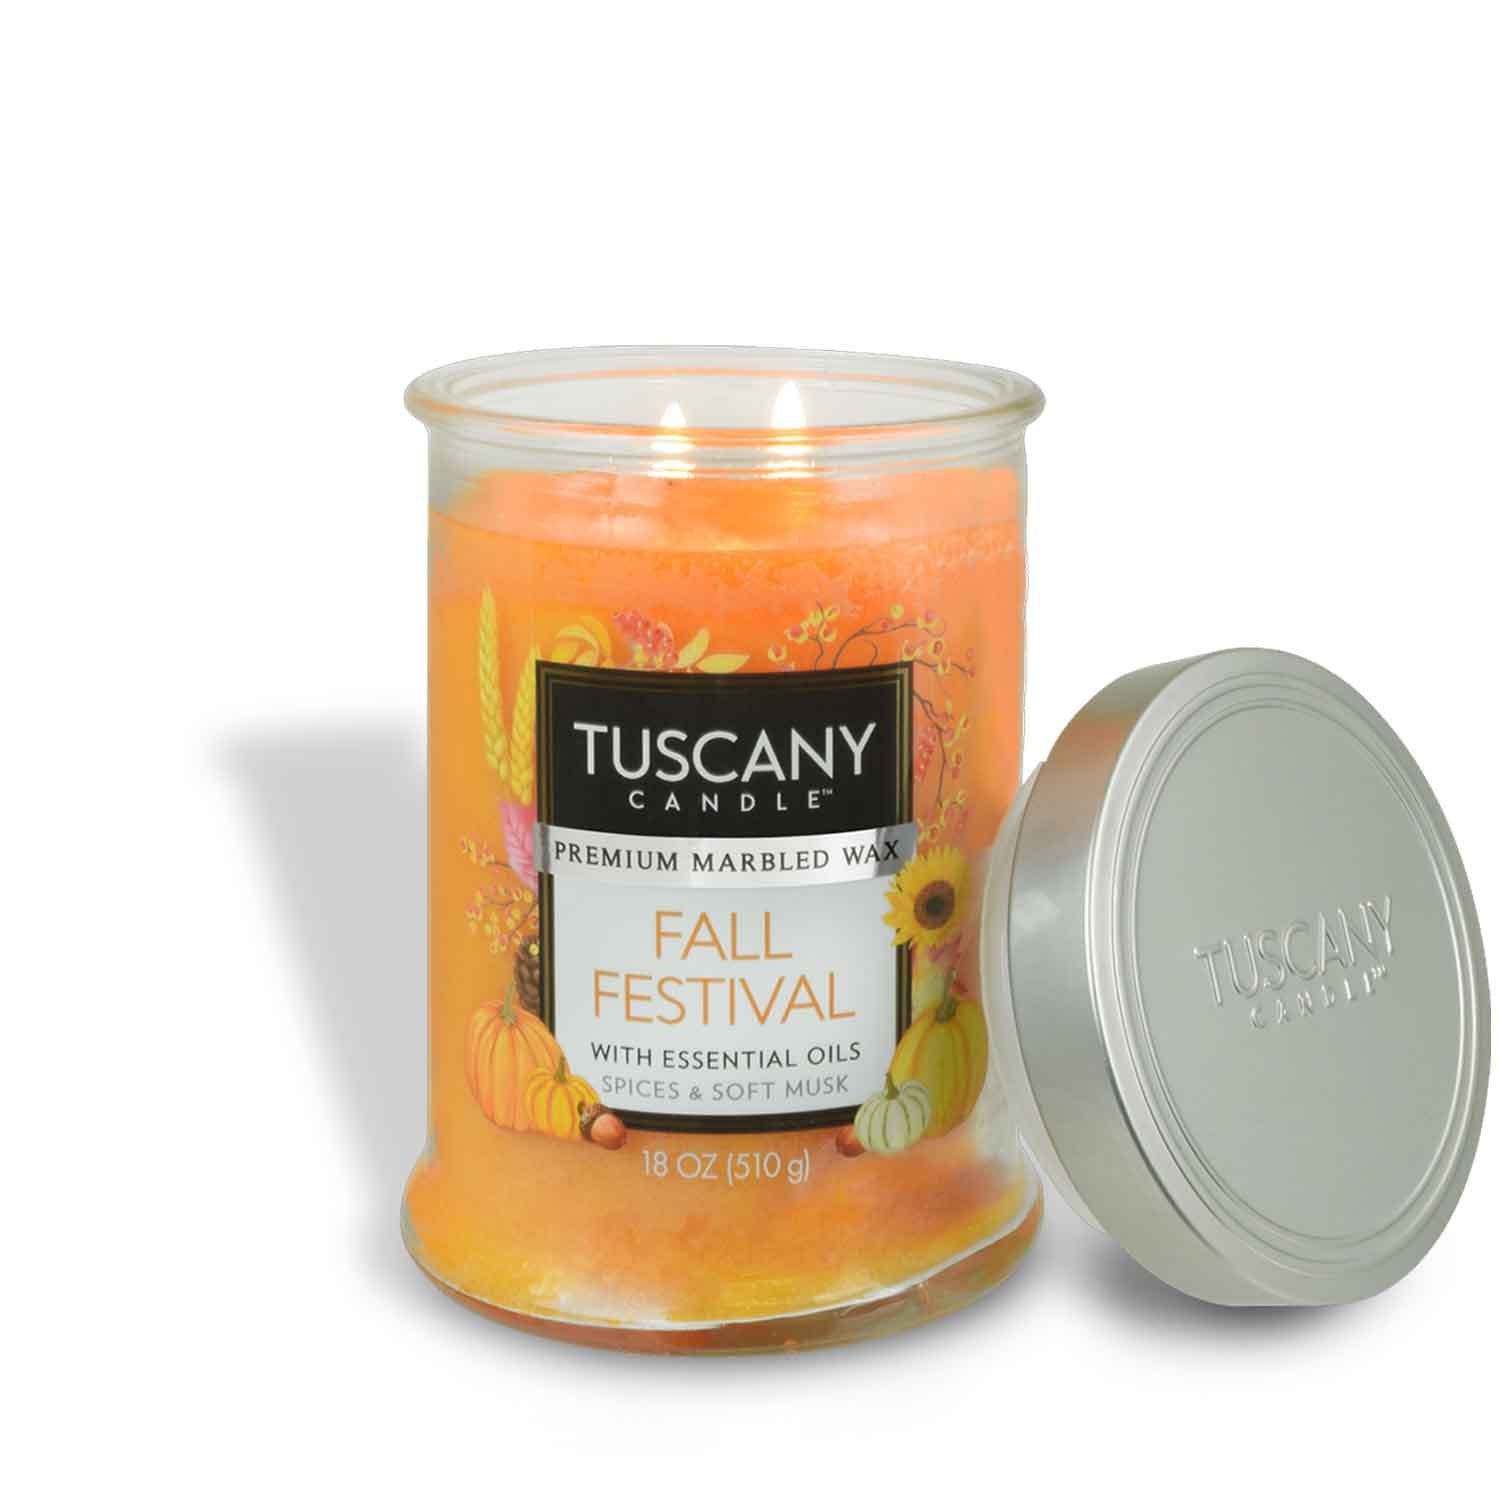 Experience long-lasting enjoyment with this Fall Festival Long-Lasting Scented Tuscany Candle jar candle, perfect for the fall season.